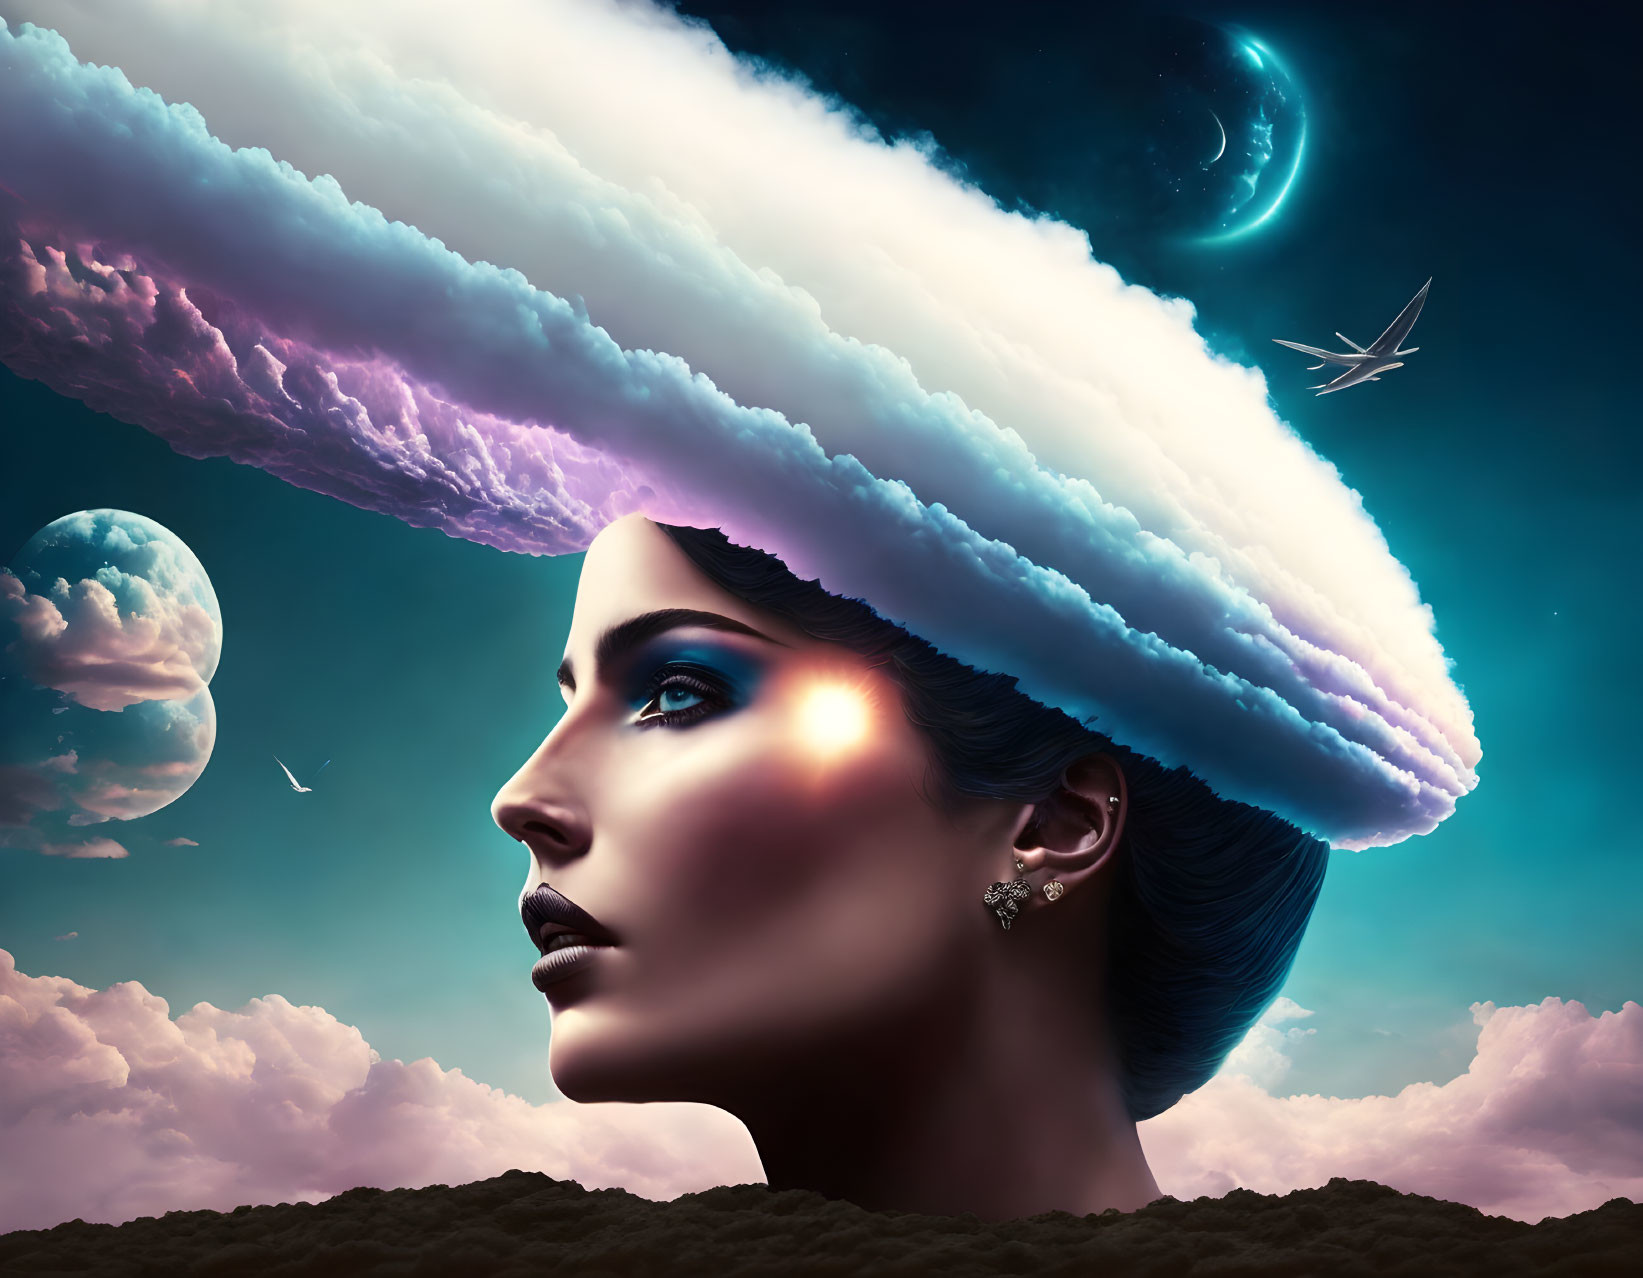 Surreal portrait: woman with cloud hair, night sky, crescent moon, full moon,